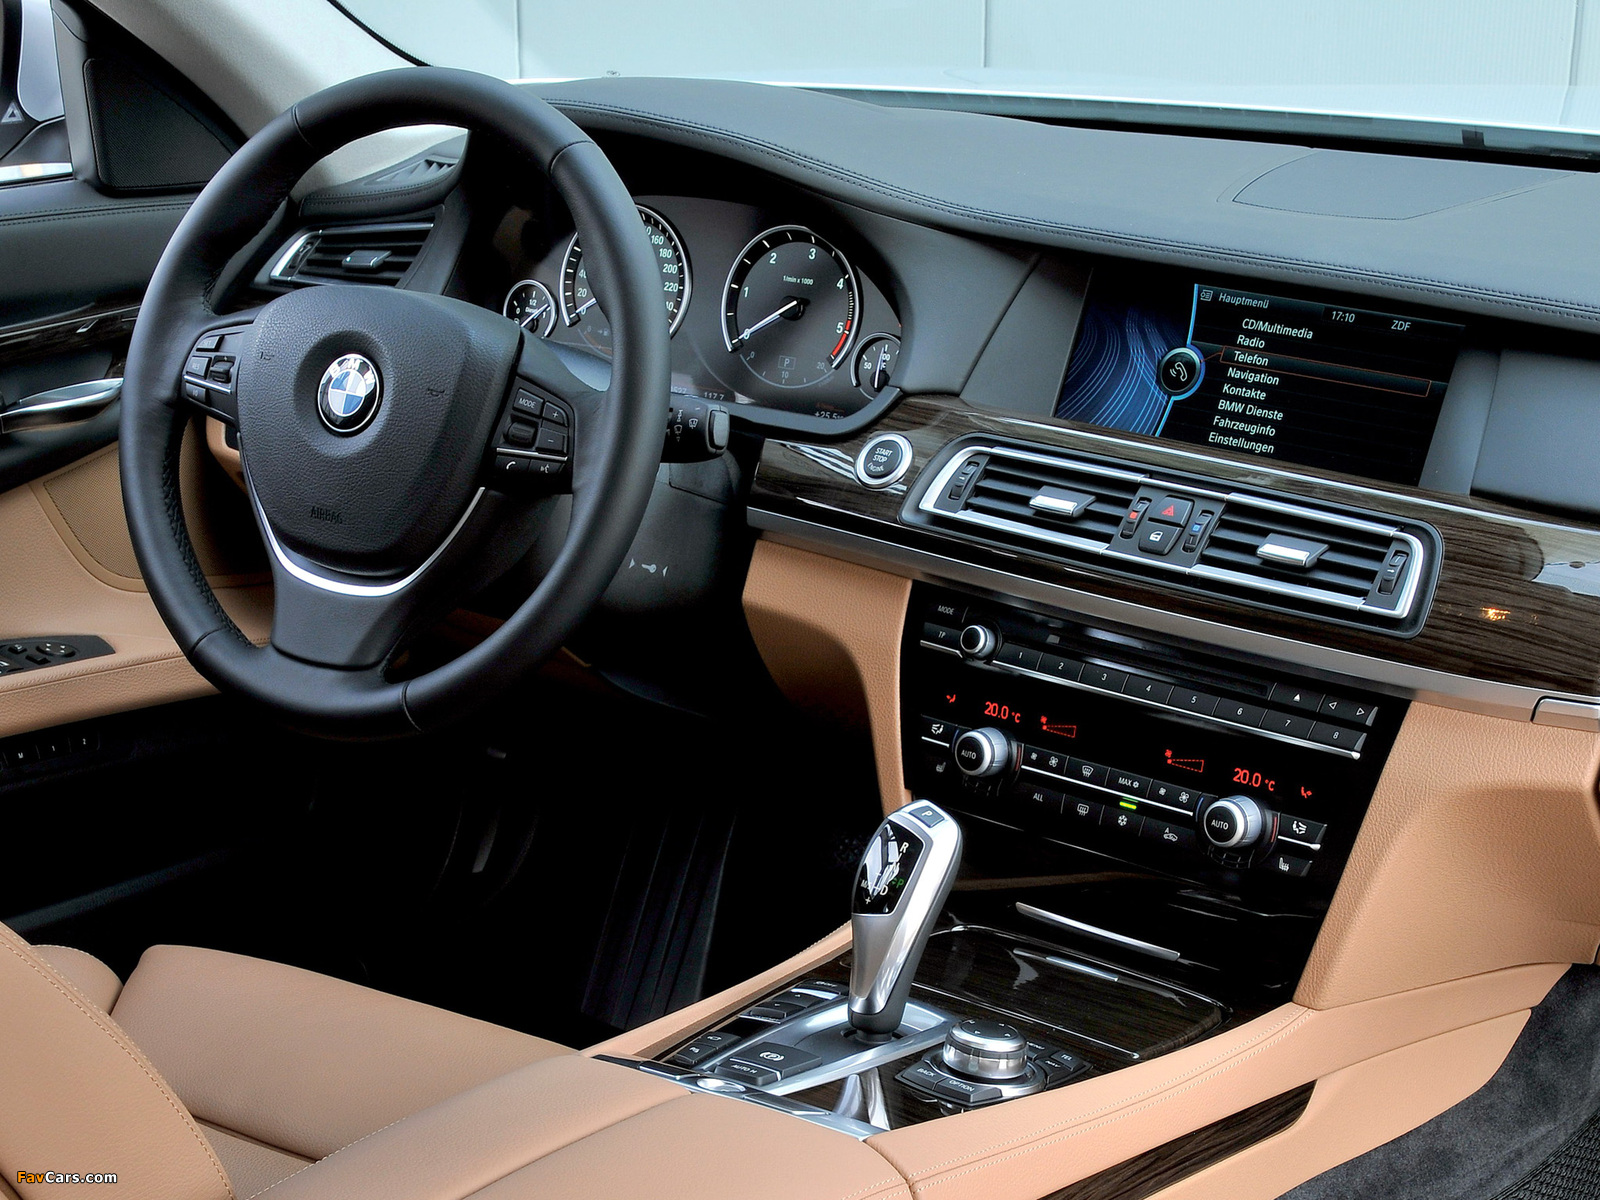 BMW 730d (F01) 2008 pictures (1600 x 1200)